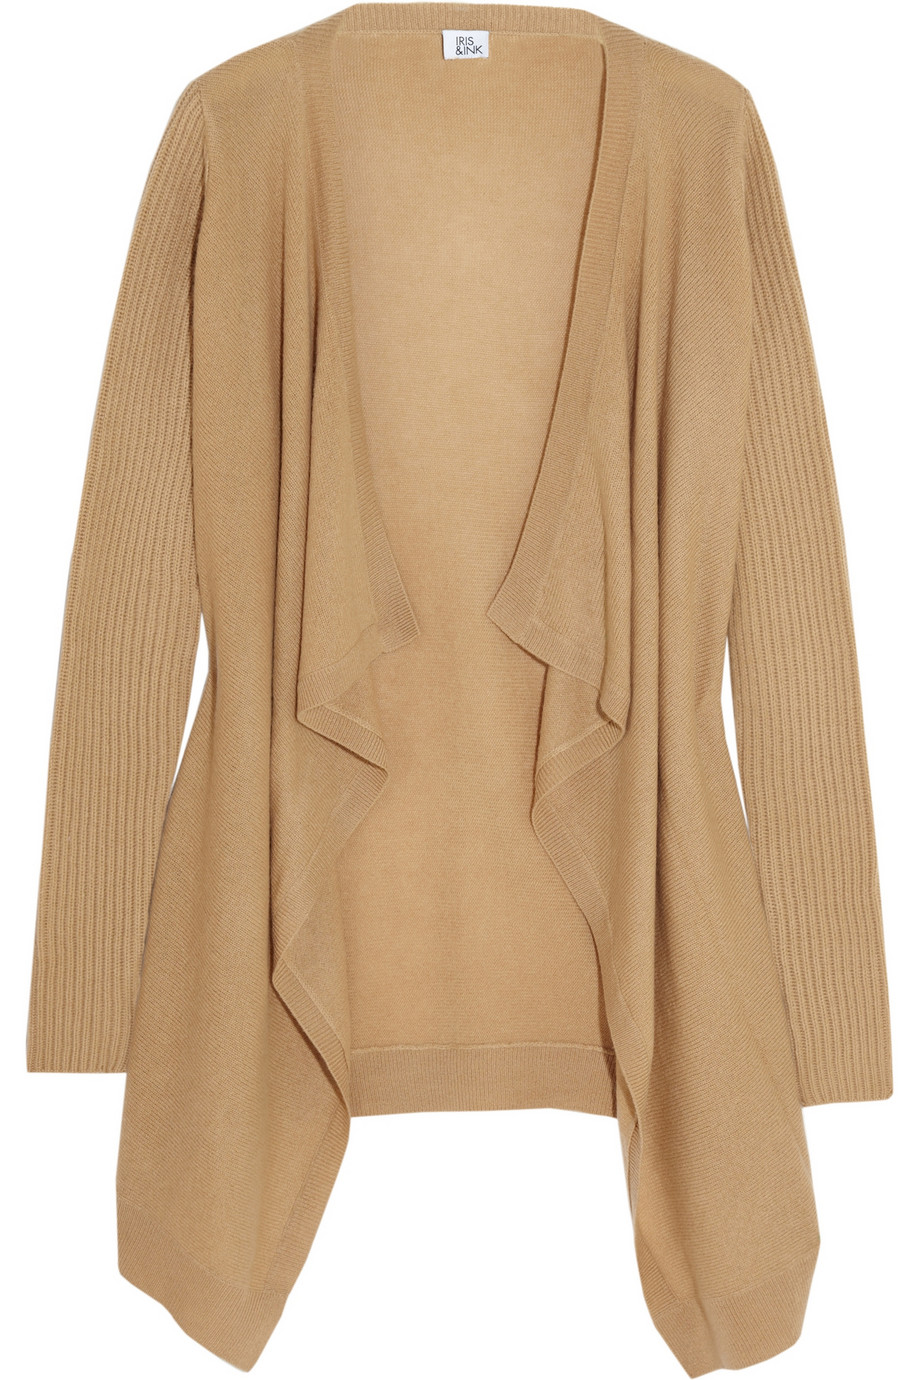 Iris & Ink Ribbedsleeve Draped Cashmere Cardigan in Camel (Natural) - Lyst